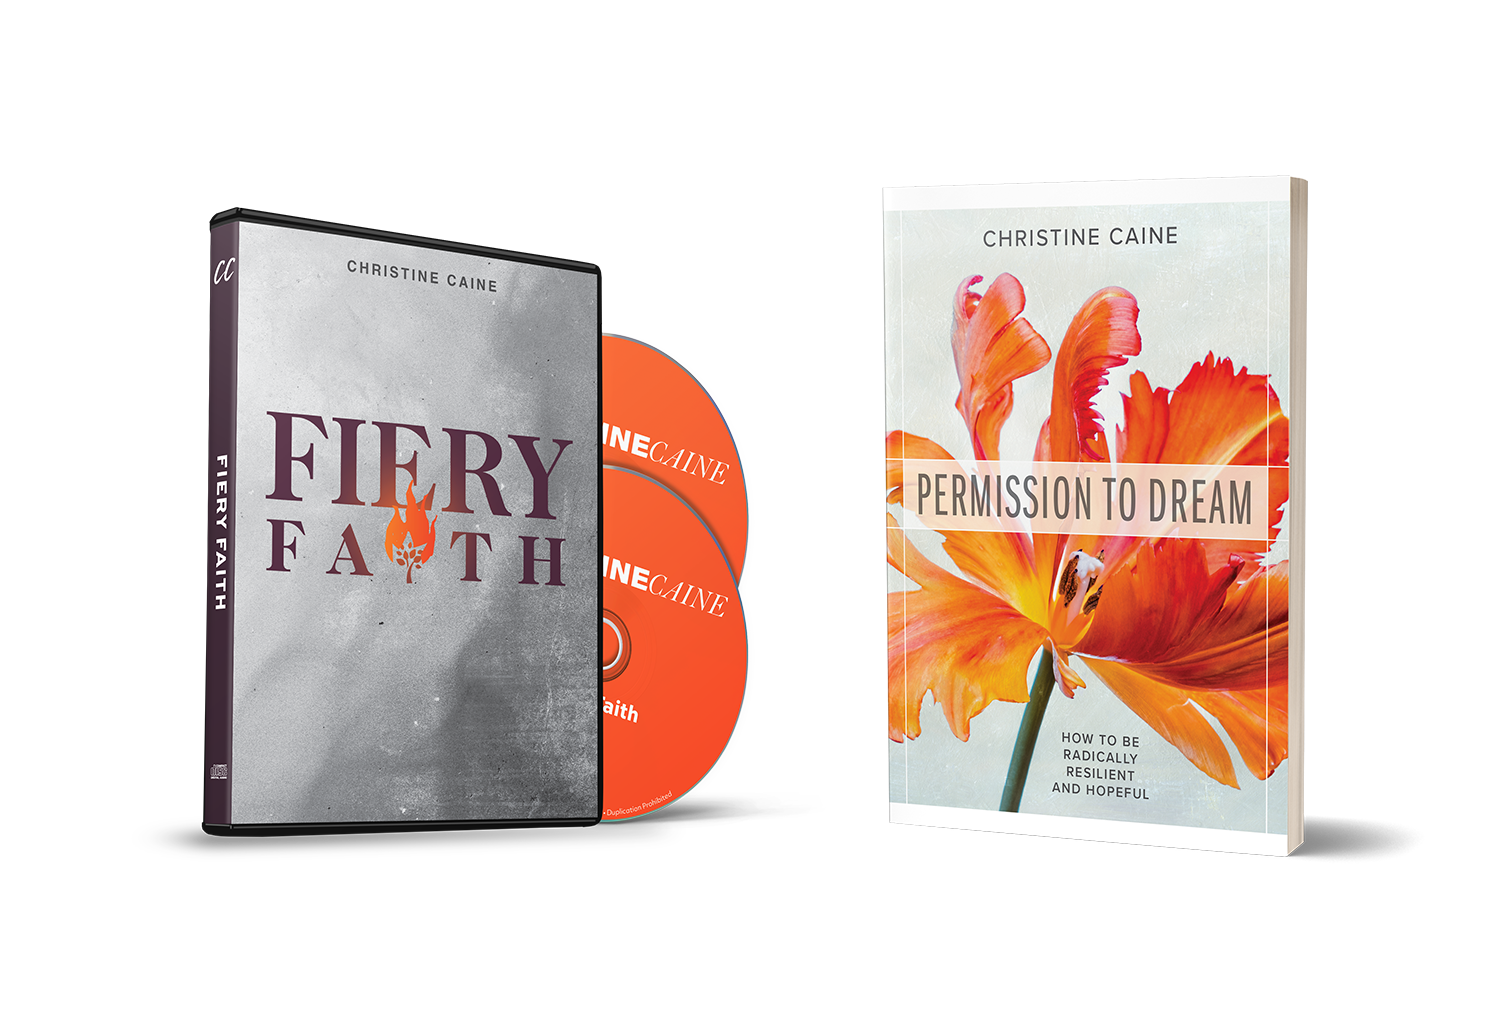 Fiery Faith + Permission to Dream by Christine Caine by TBN